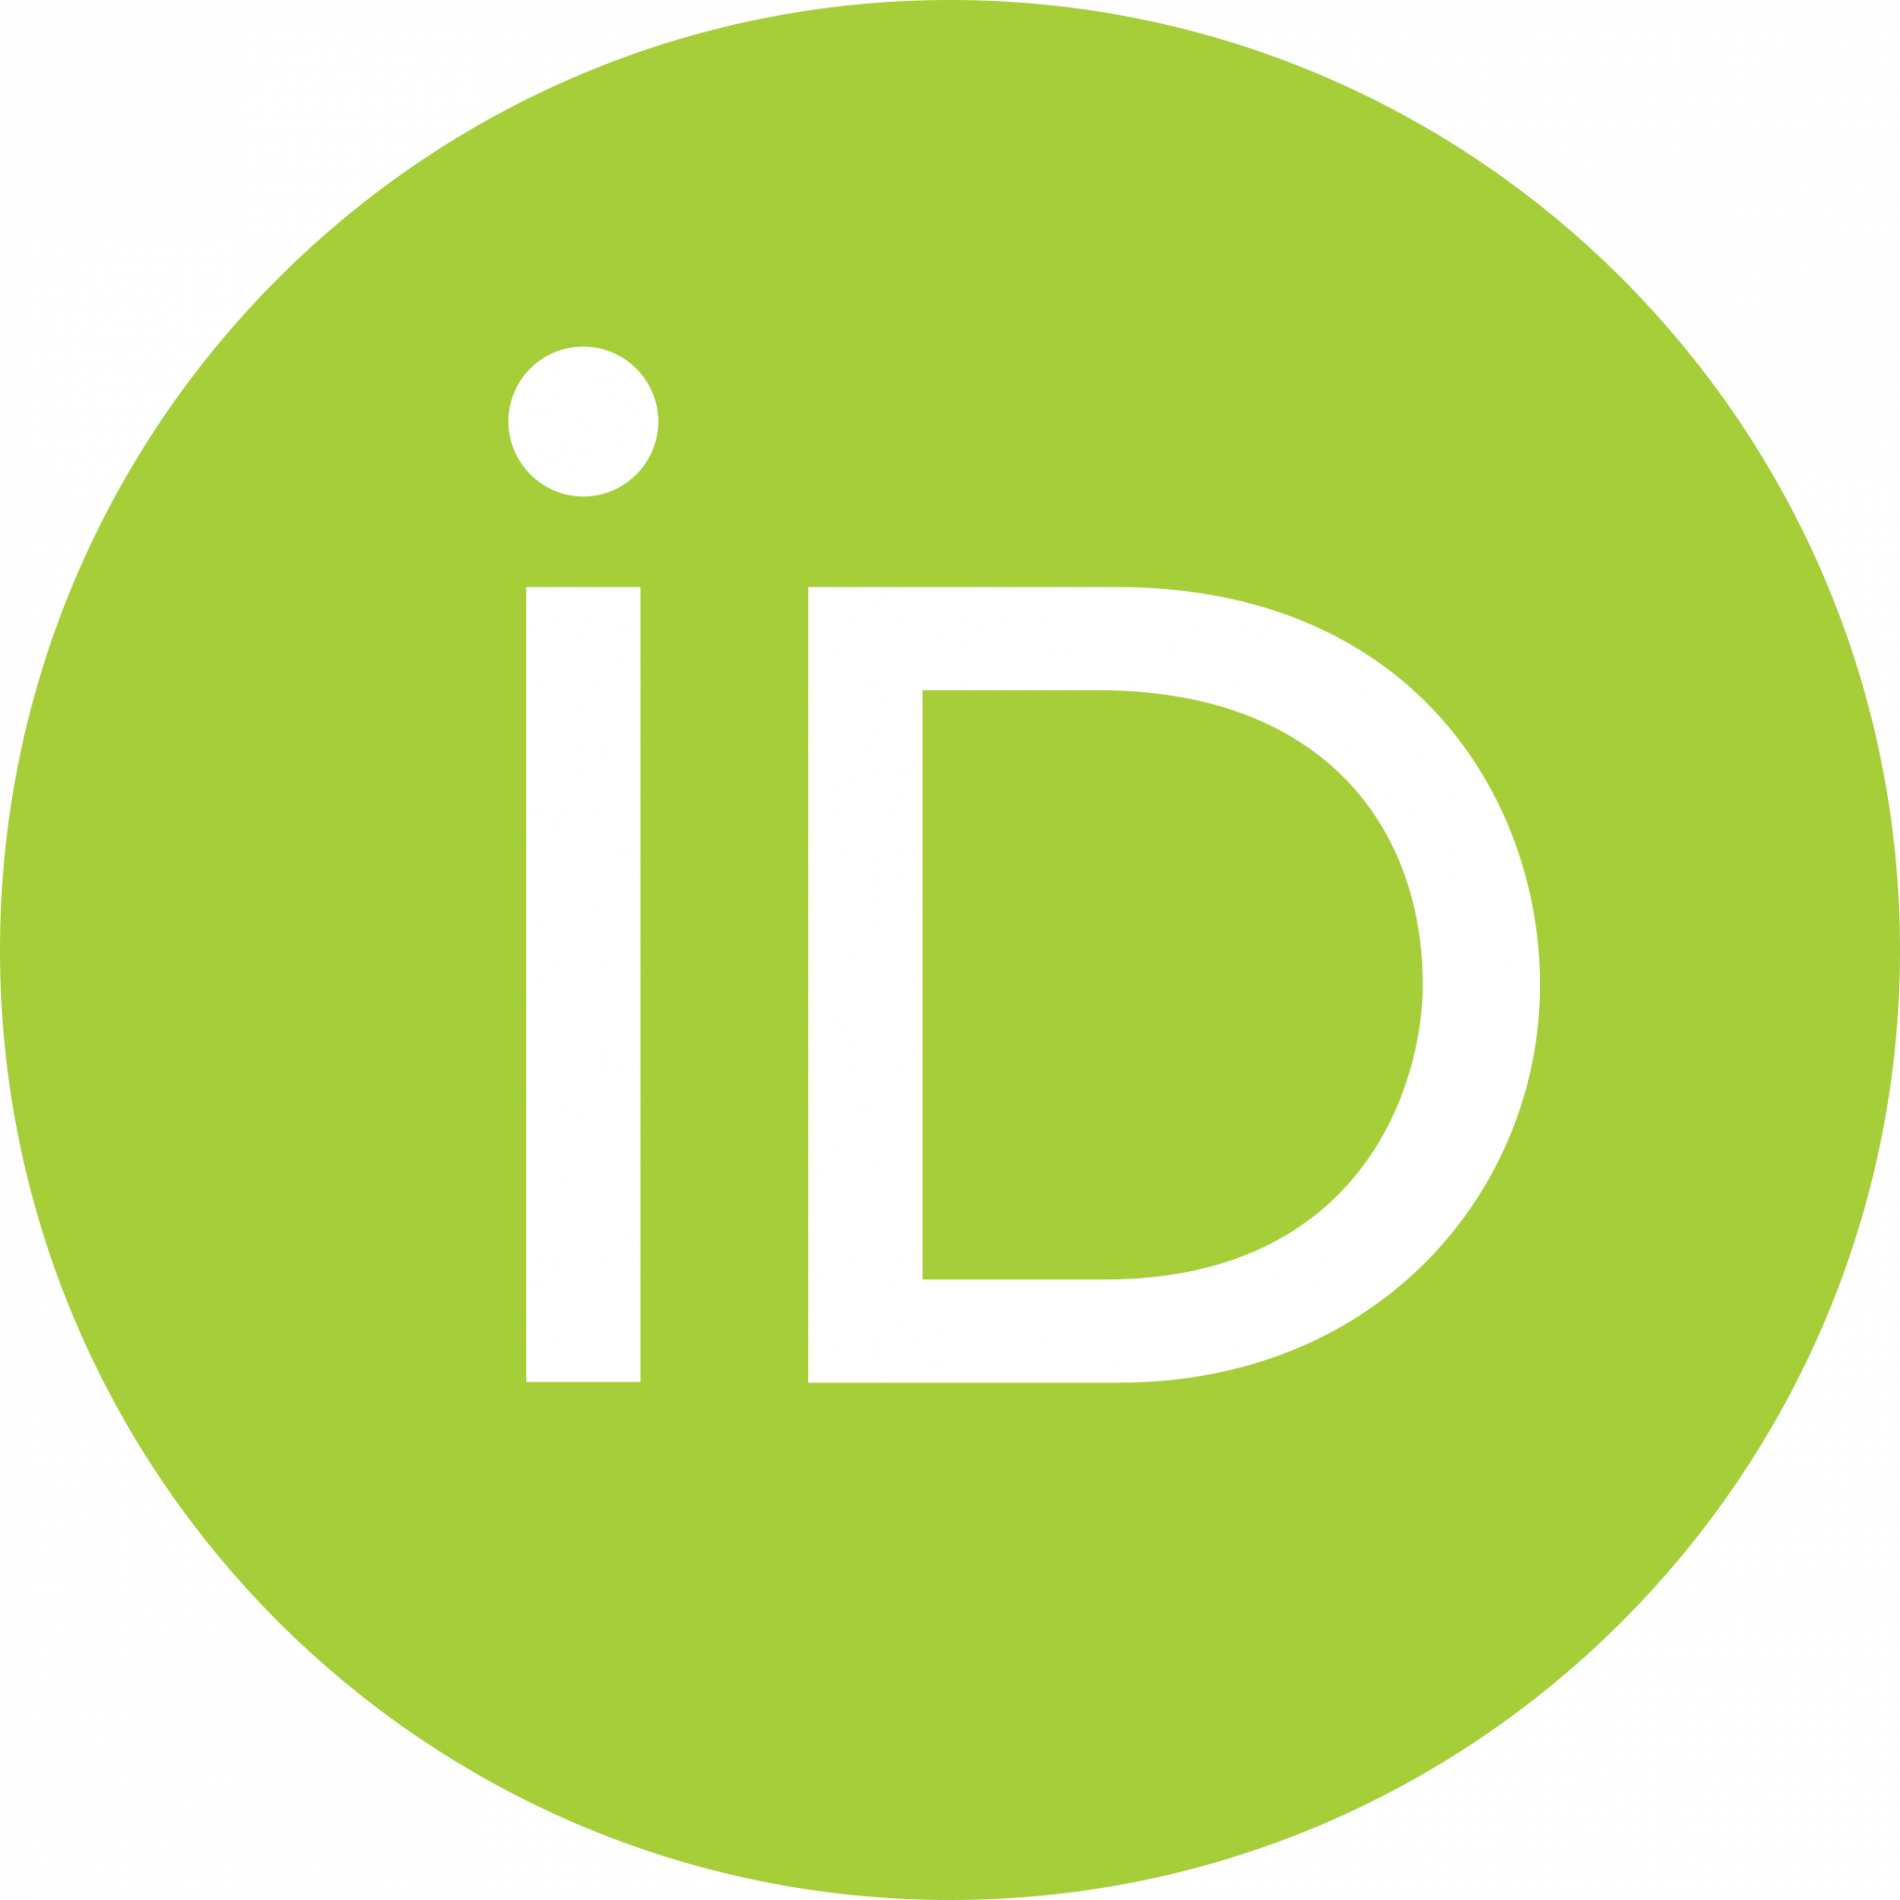 orcid_id.png